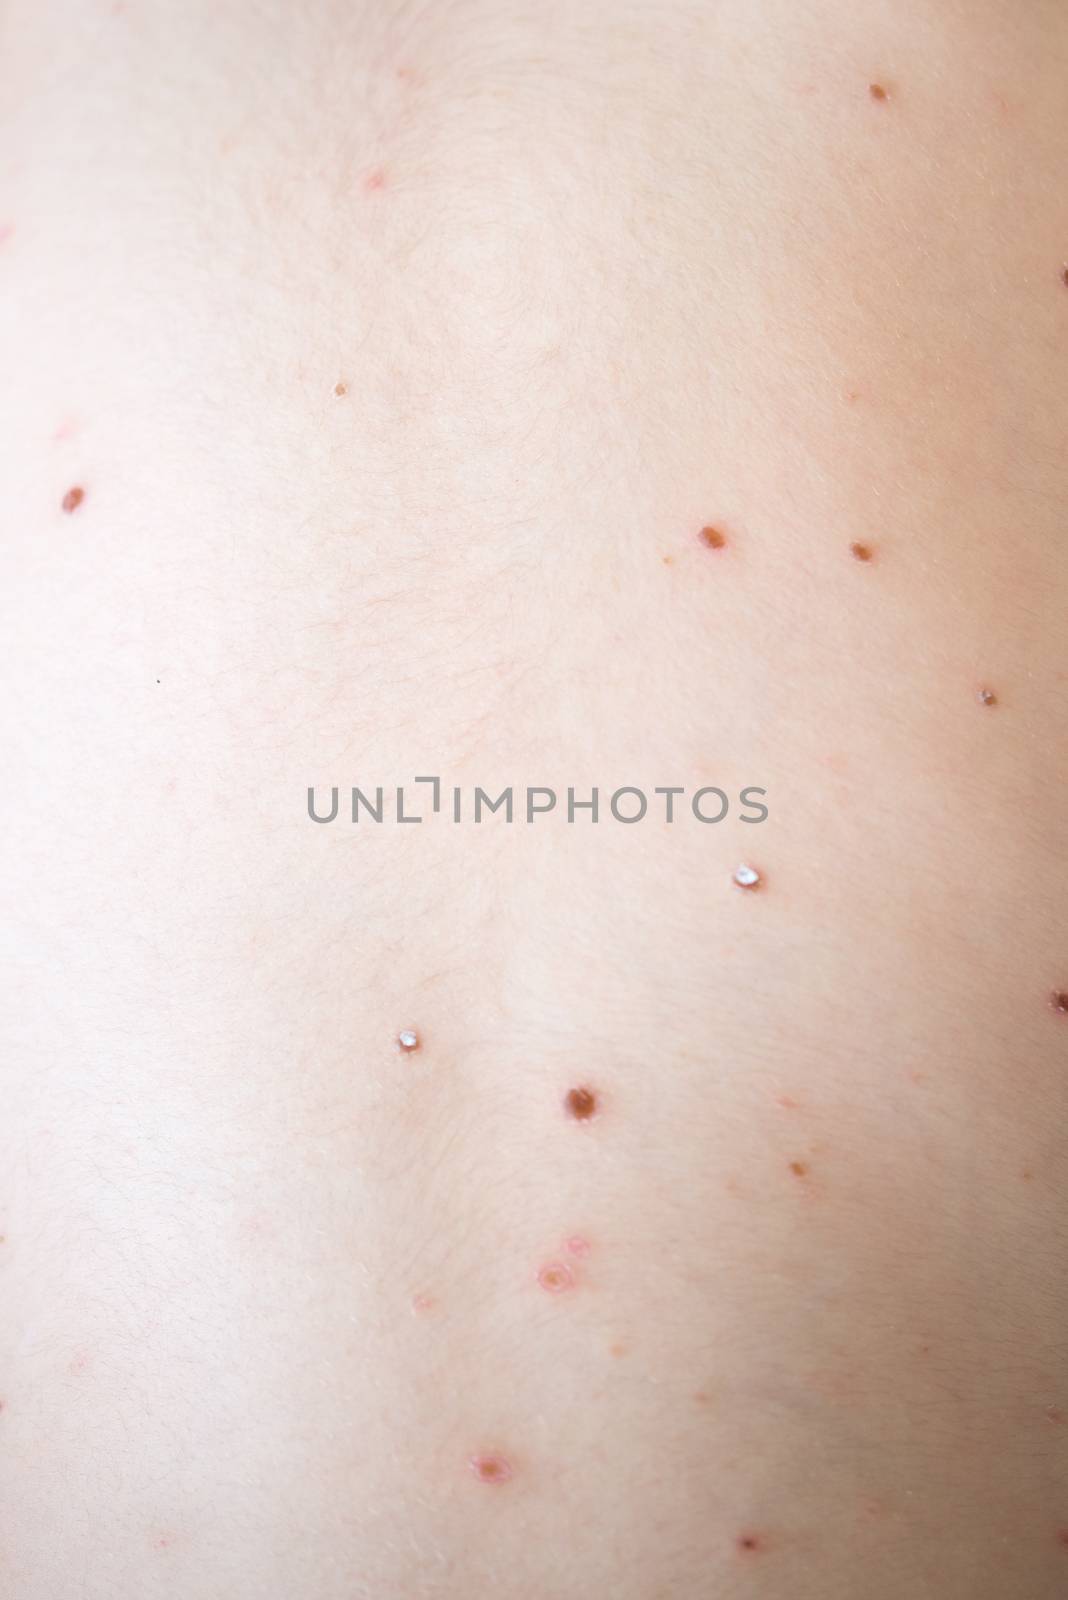 Chickenpox on the body of a young child, skin infection